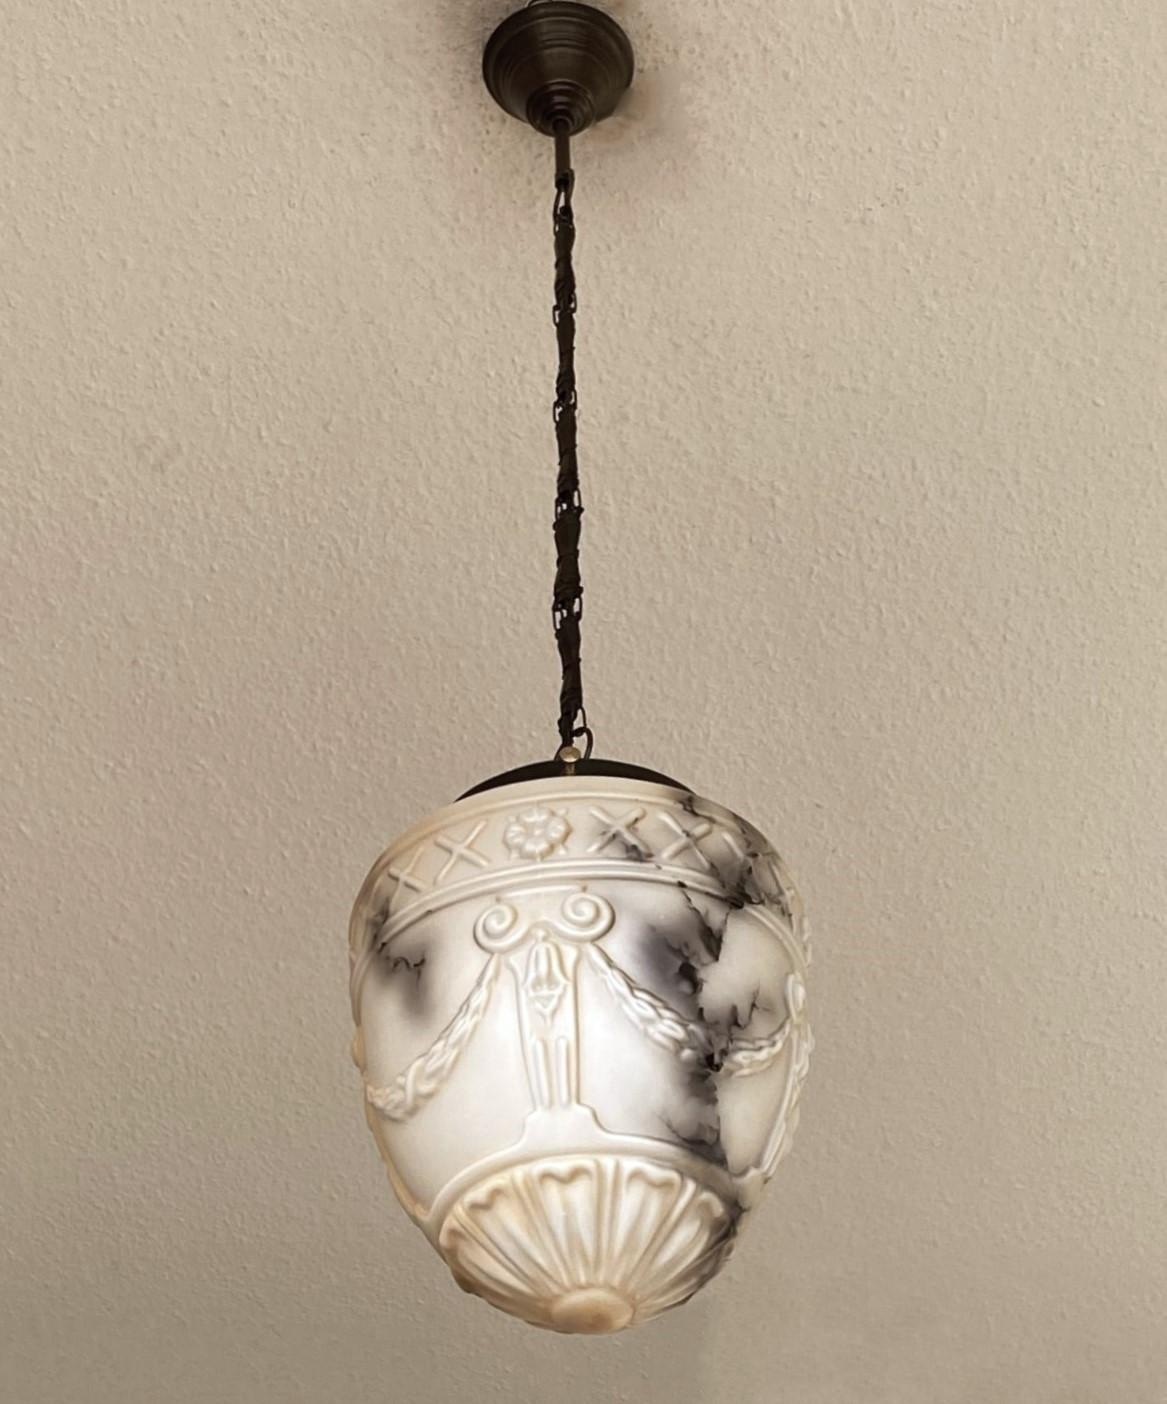 French Art Deco Alabaster Looking High-Releaf Glass Pendant Lantern, 1920-1930 For Sale 3